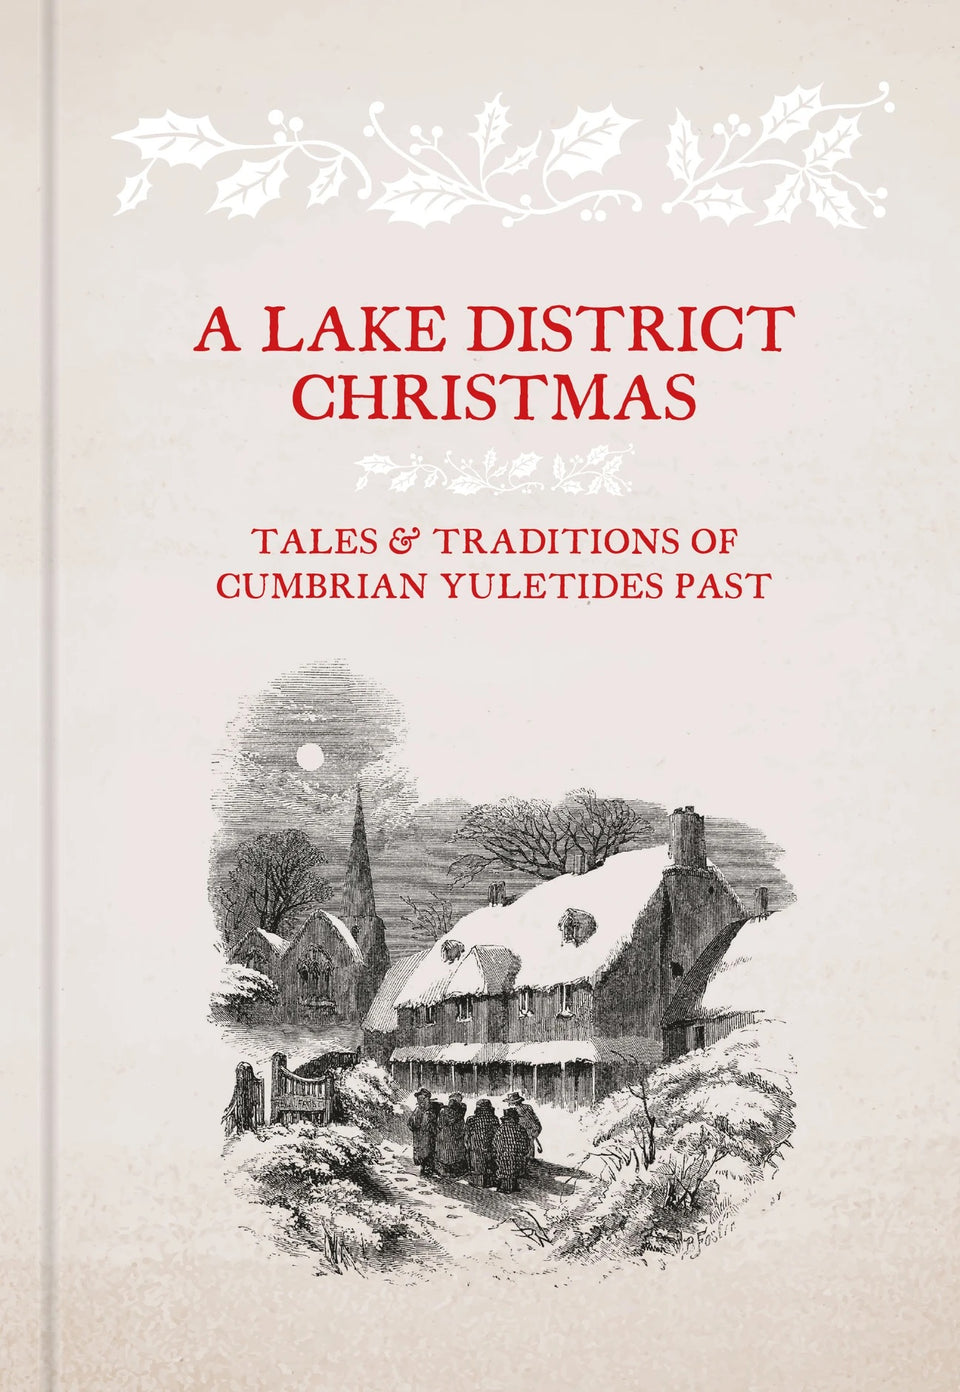 'A Lake District Christmas' compiled by Alan Cleaver